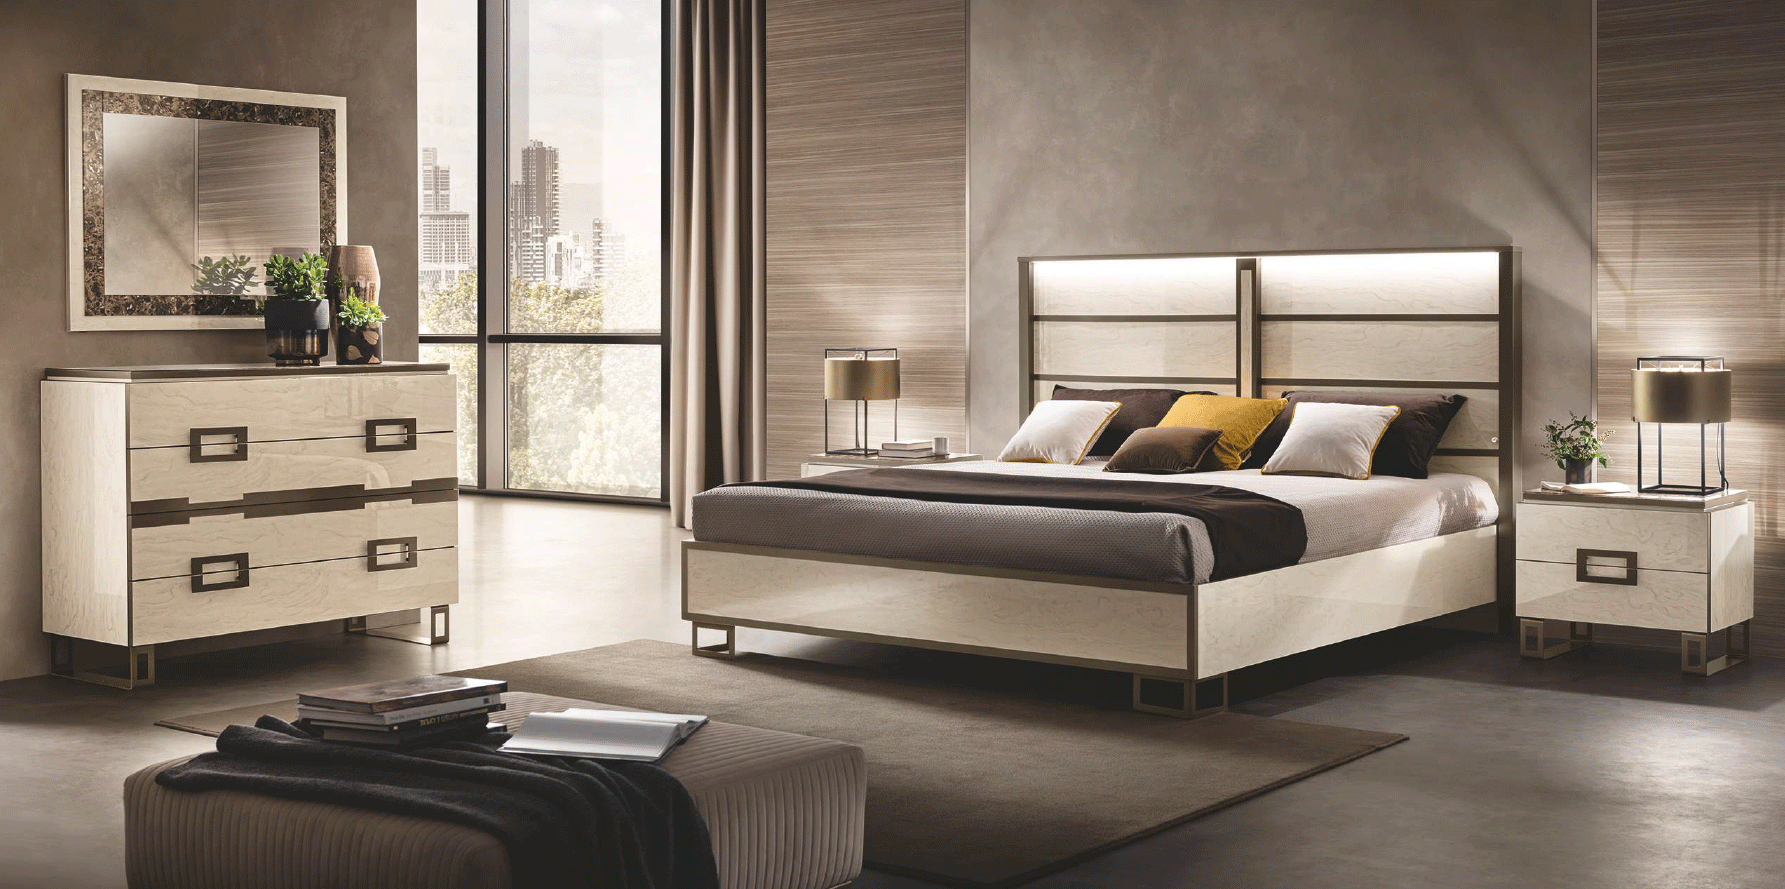 Bedroom Furniture Classic Bedrooms QS and KS Poesia Bedroom Additional items